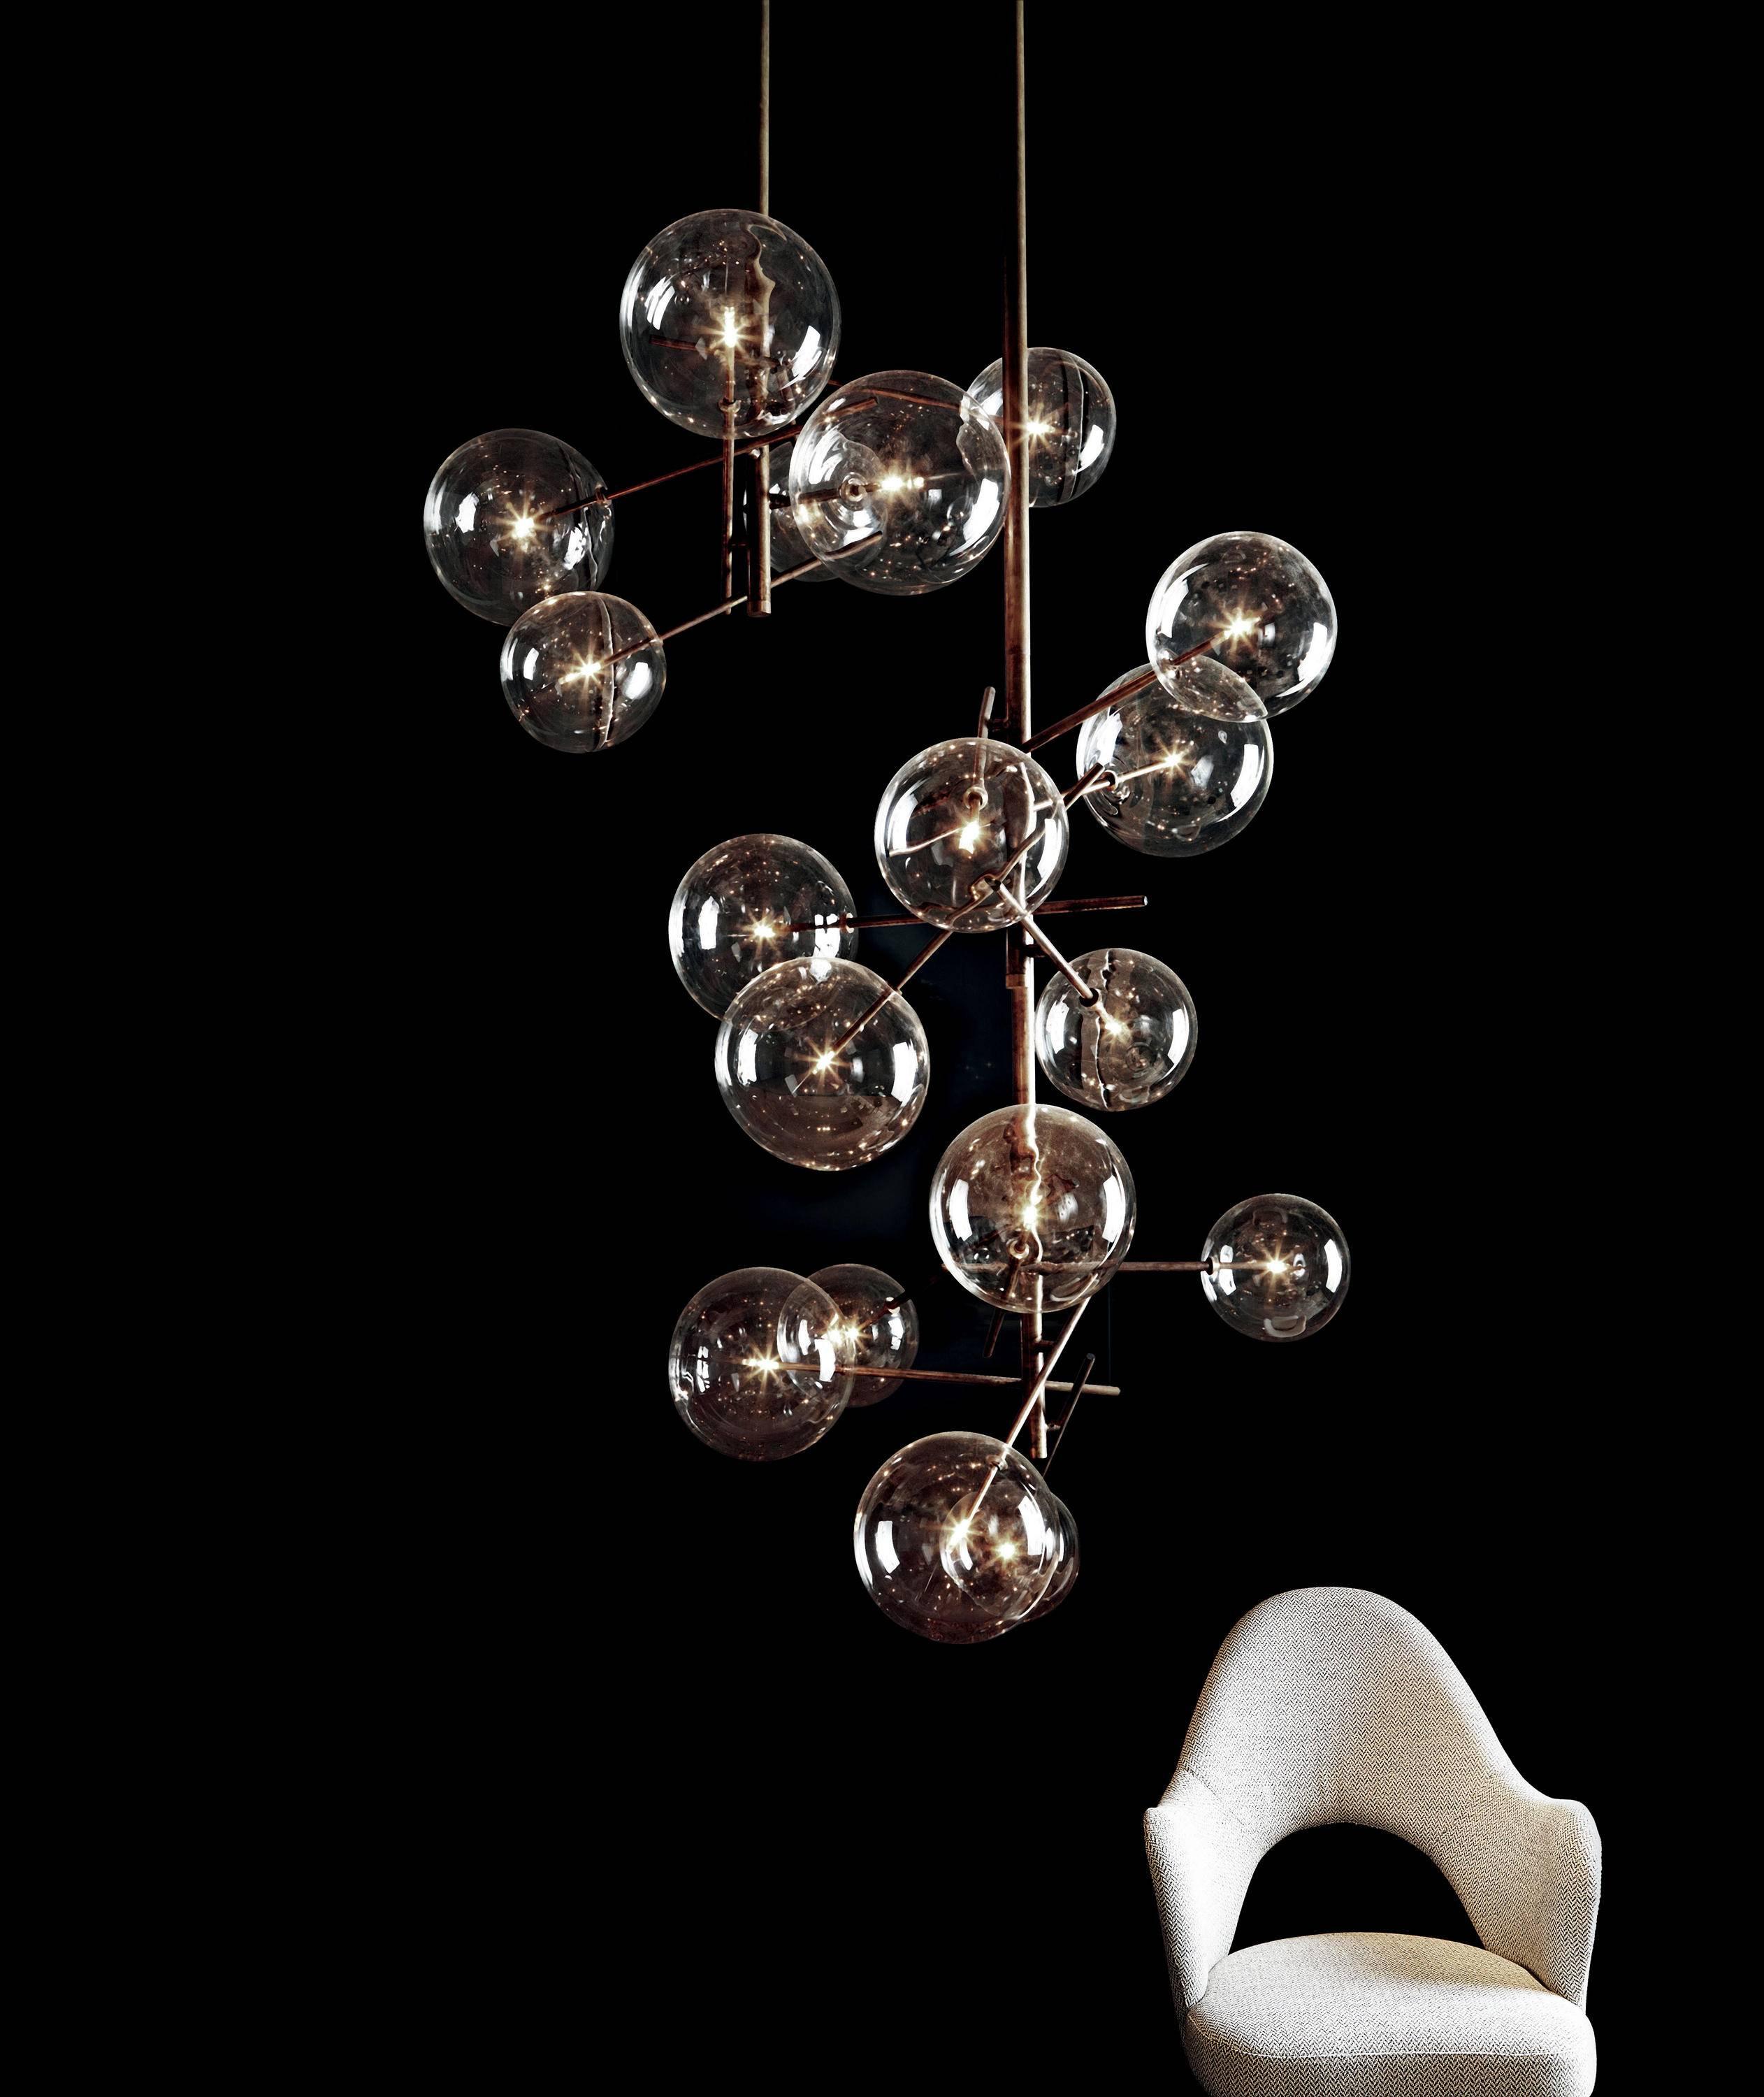 Gallotti & Radice Bolle 6 Sphere Suspension Lamp in Glass and Burnished Brass.

Hanging pendant lamp with six transparent blown glass spheres. Also available in a version with four spheres. Metal stems in hand burnished brass which will patina over